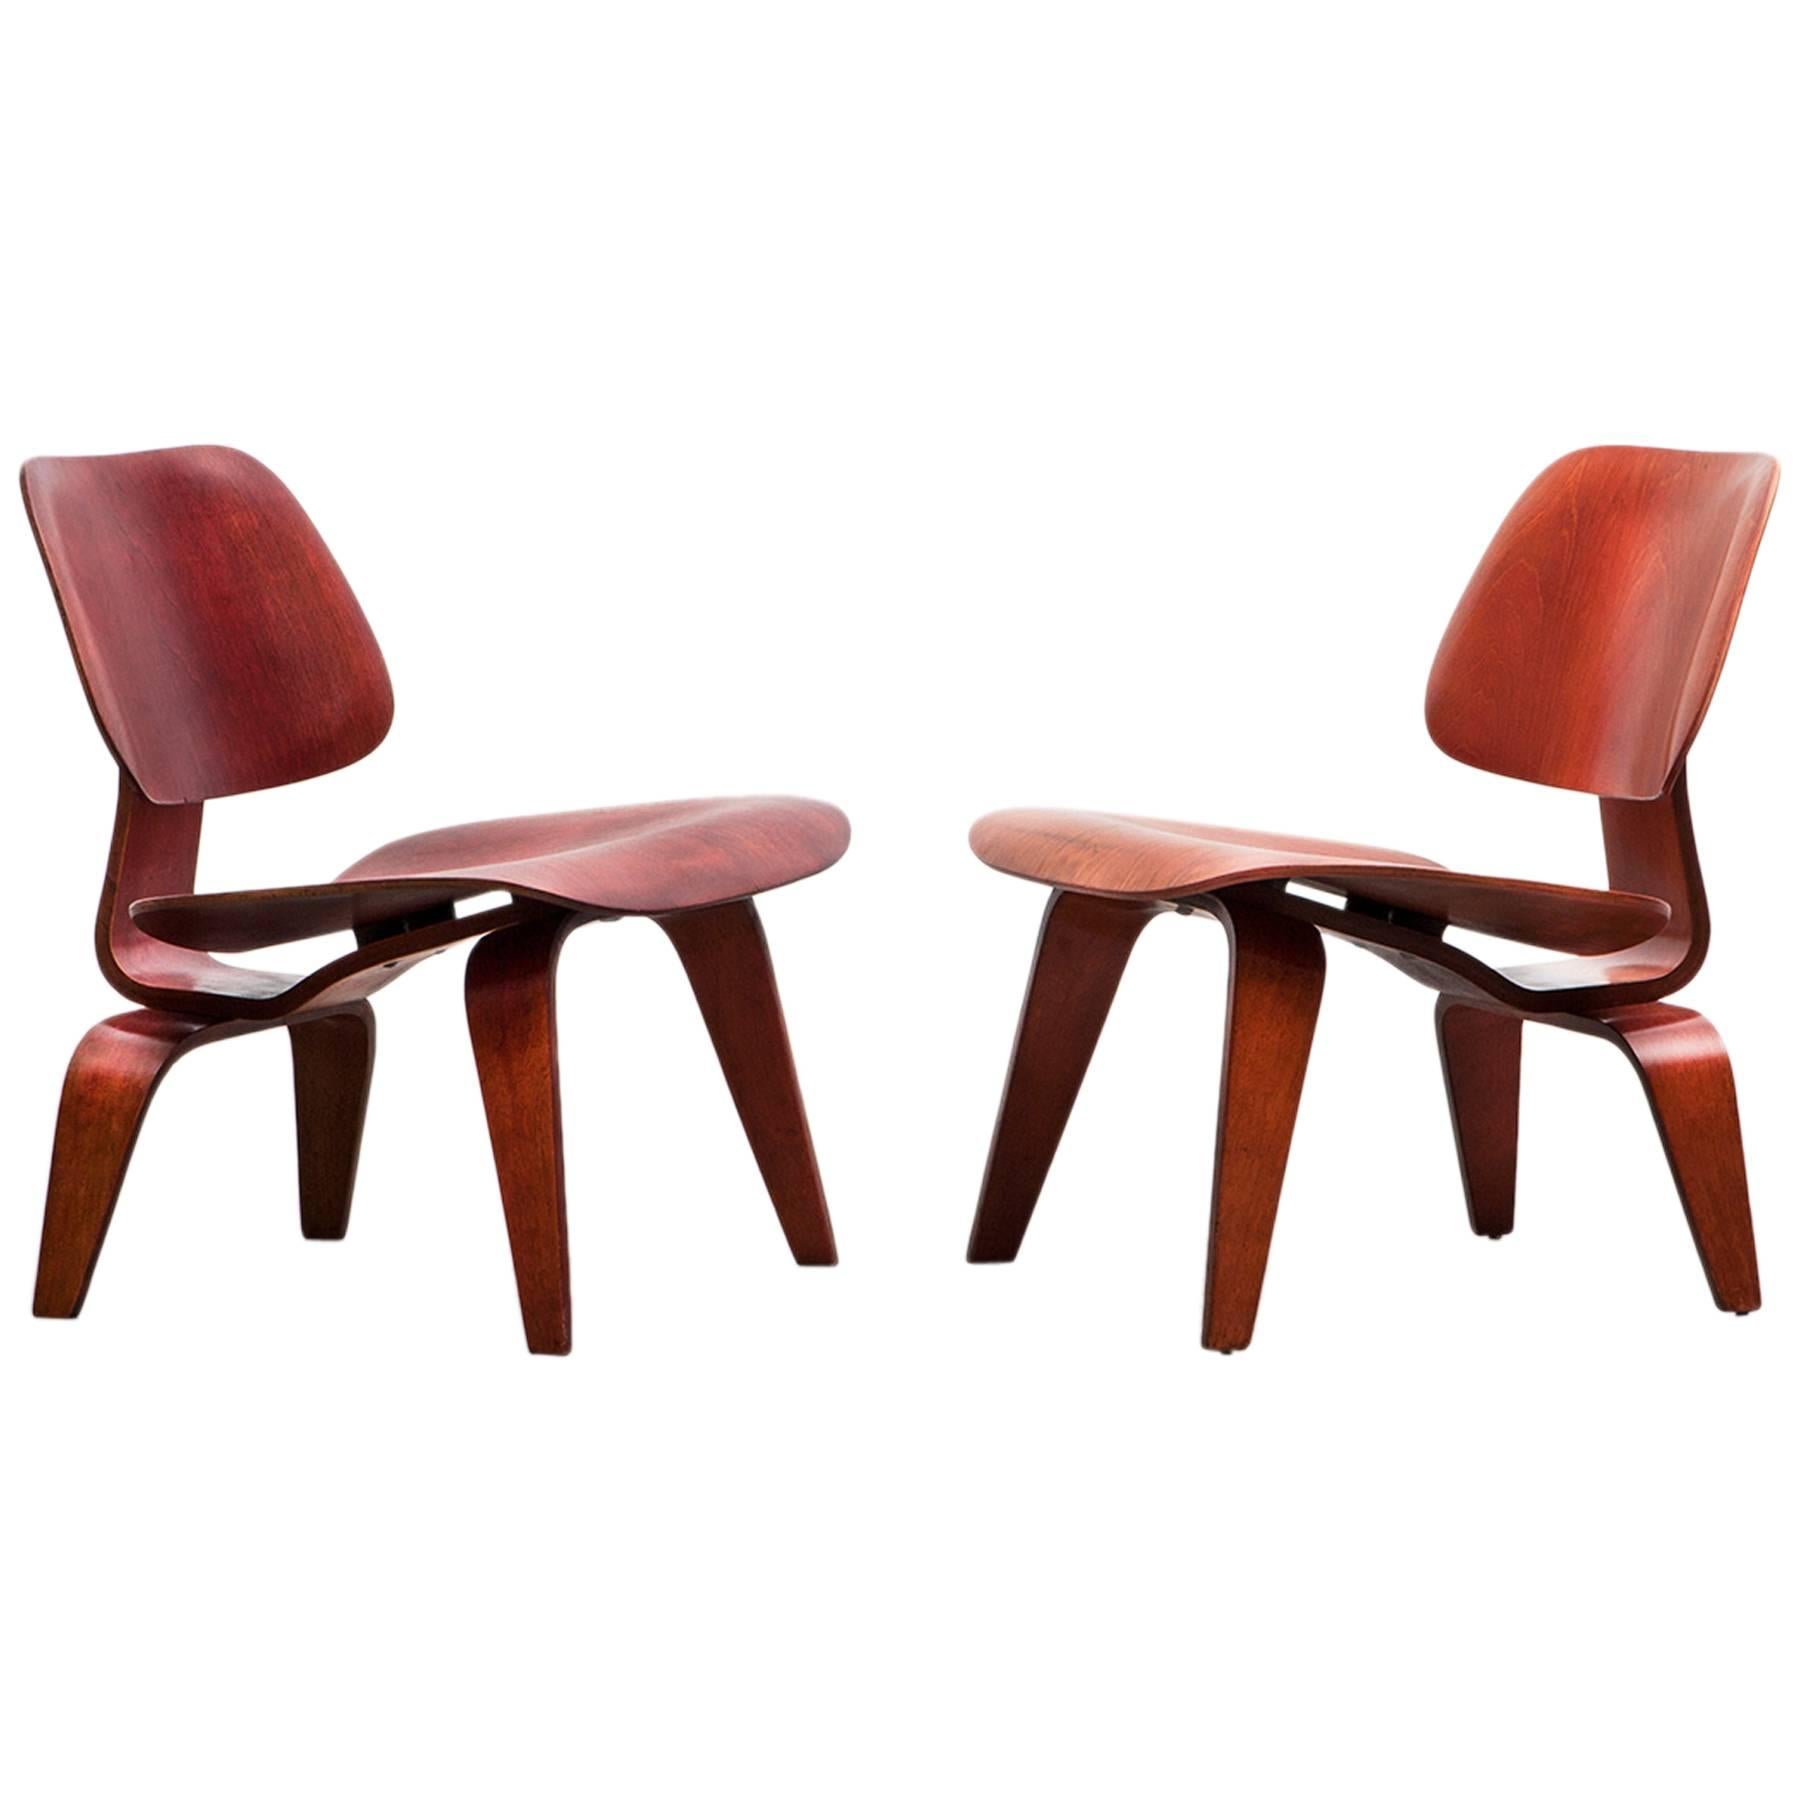 1940's red, brown molded plywood set of Charles and Ray Eames LCW Chairs 'b' For Sale